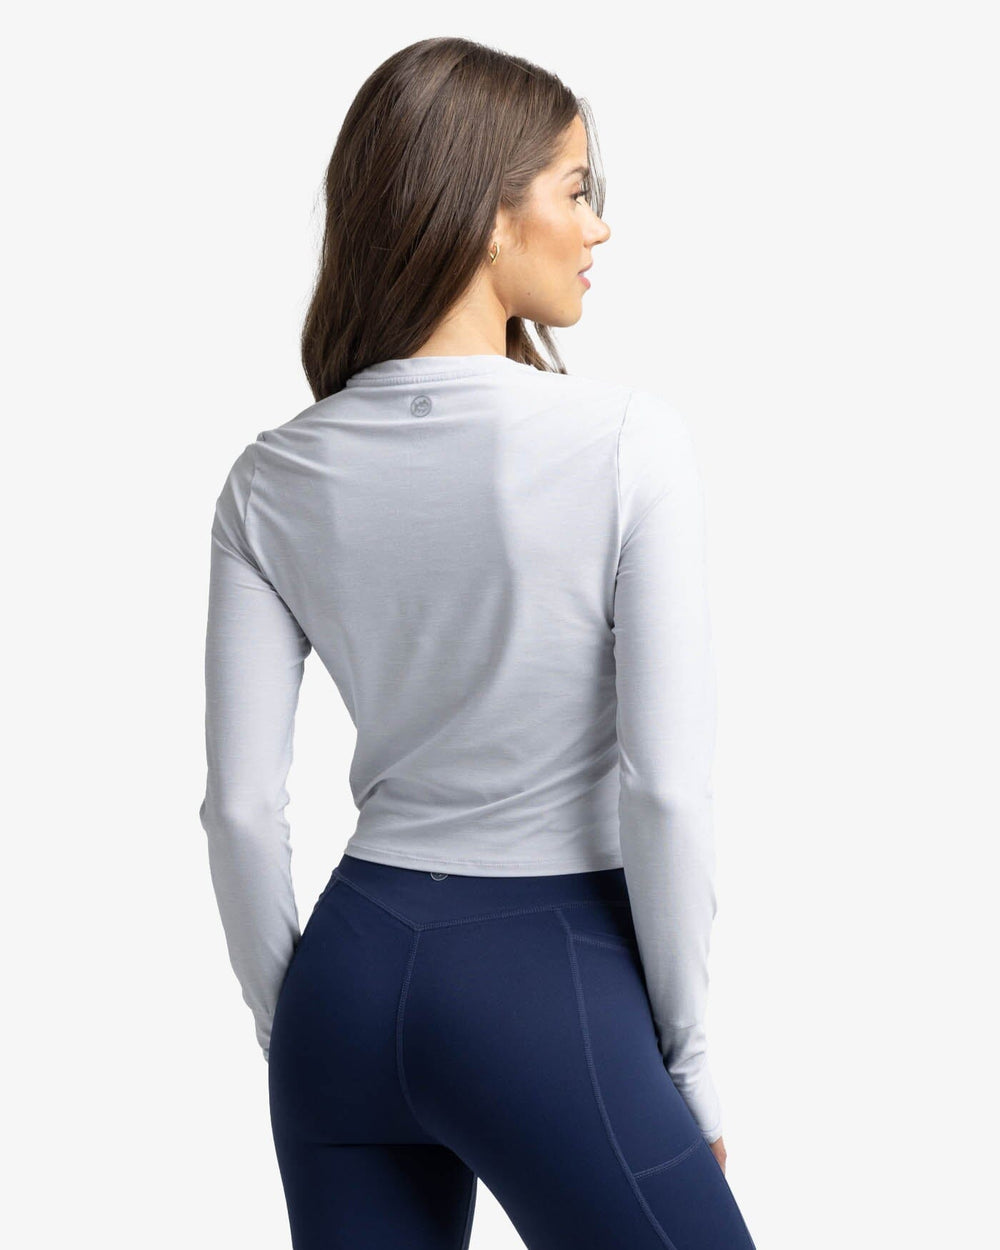 The back view of the Southern Tide Margot brrr°-illiant Twist Knot Top by Southern Tide - Platinum Grey